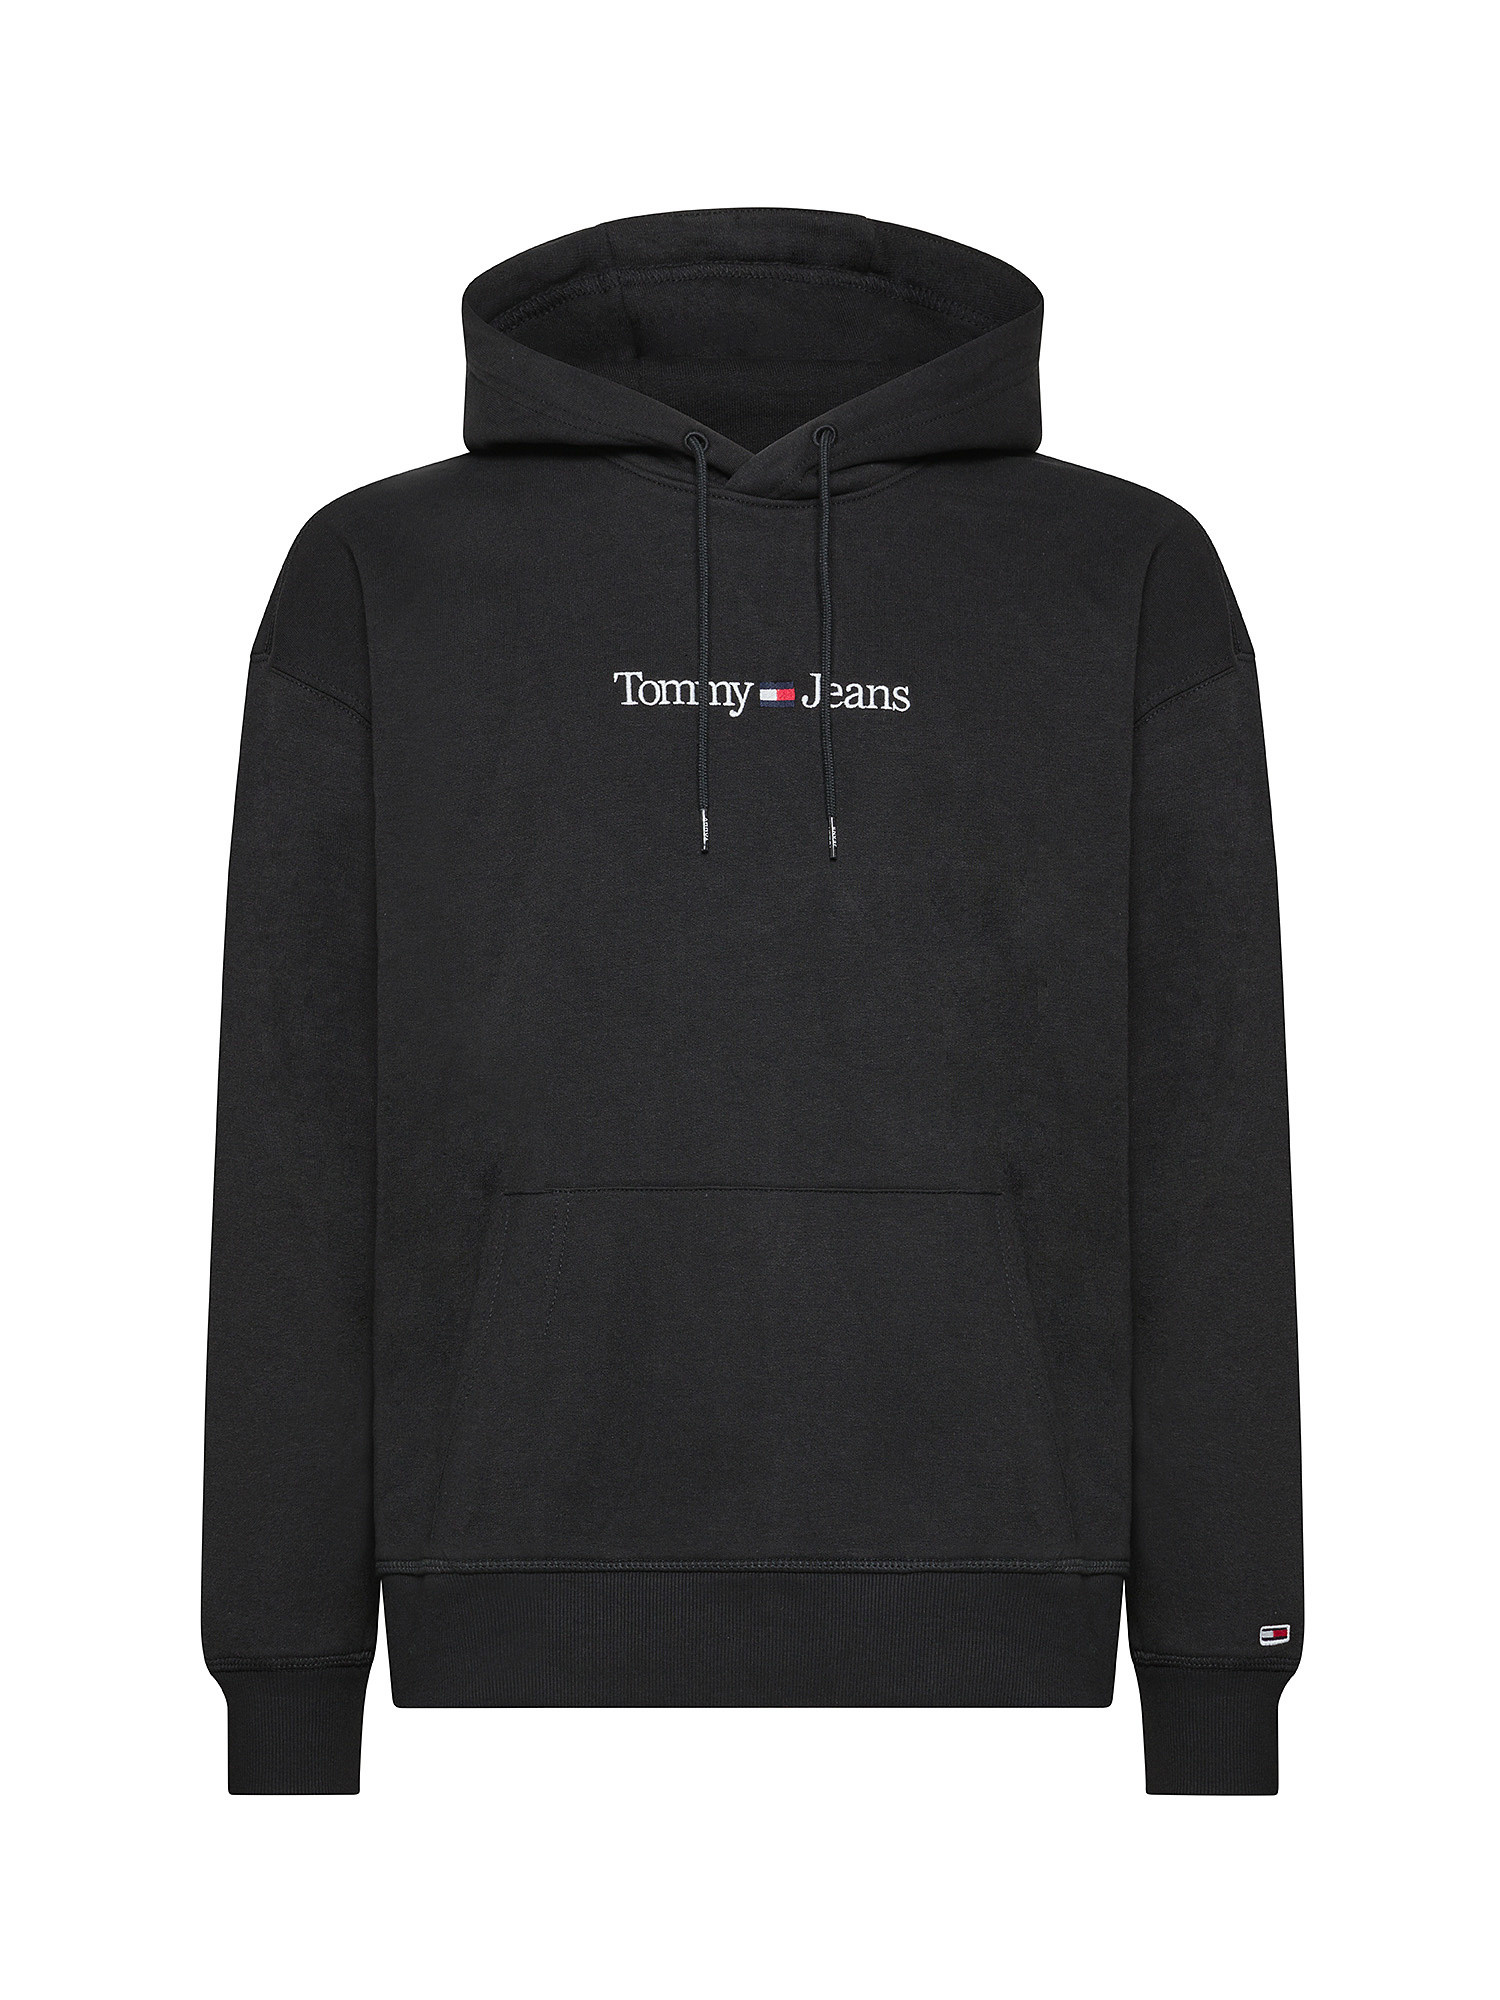 Tommy Jeans - Hooded cotton sweatshirt with micrologo, Black, large image number 0